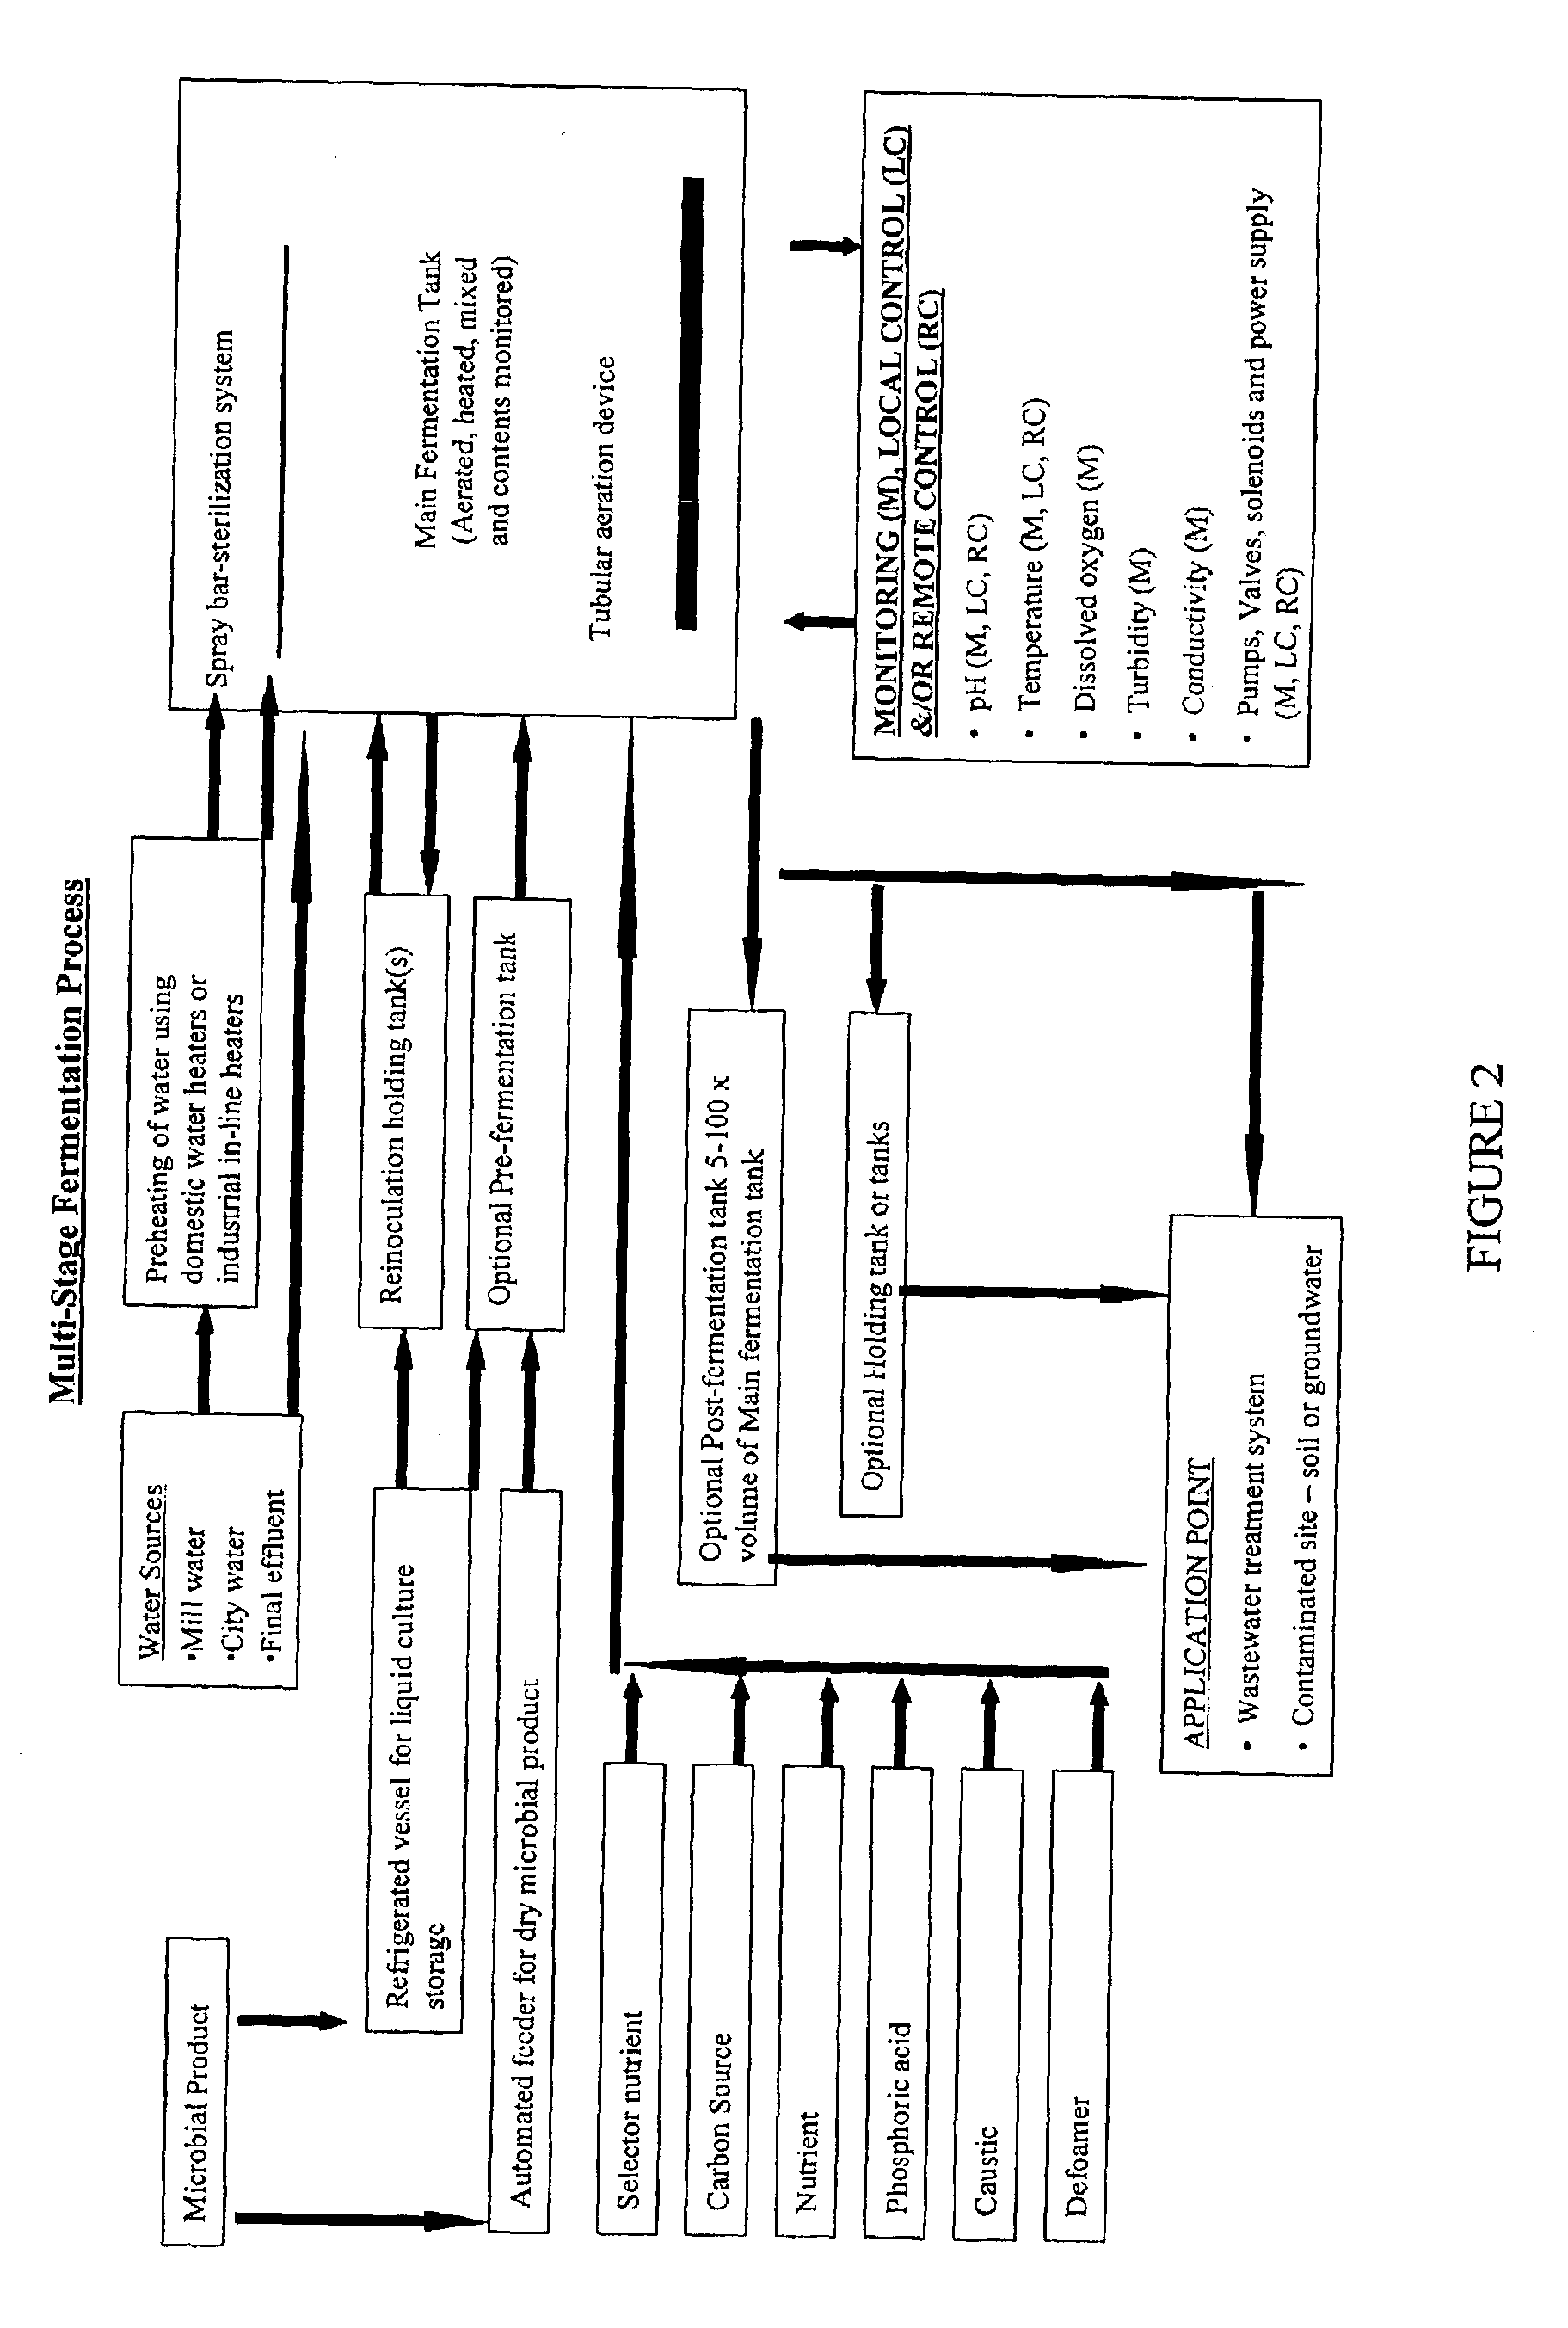 Fermentation systems, methods and apparatus